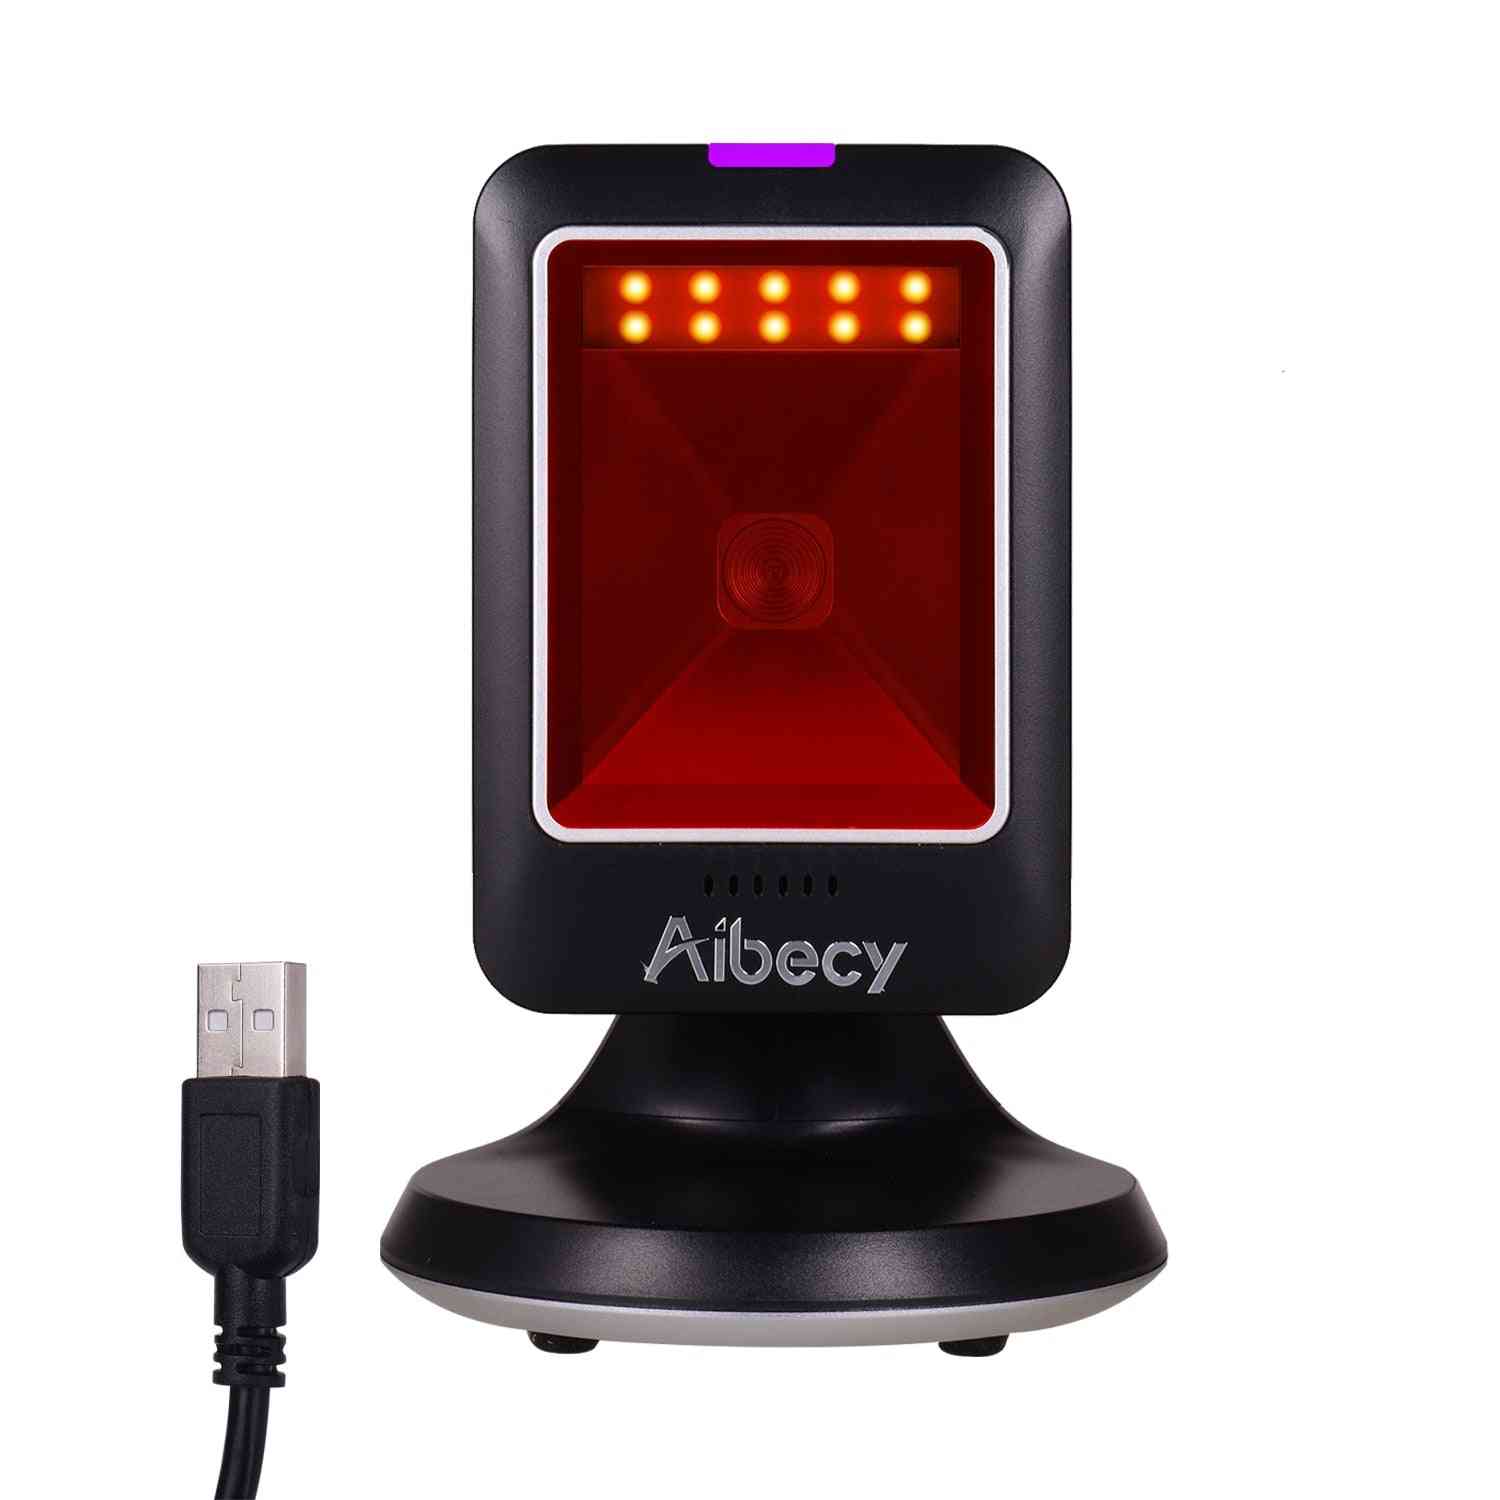 Aibecy Mp6300y 1d/2d/qr Omnidirectional Barcode Scanner, Usb Wired Bar Code Reader / Cmos Hand-free Qr Code Scanner For  Retail